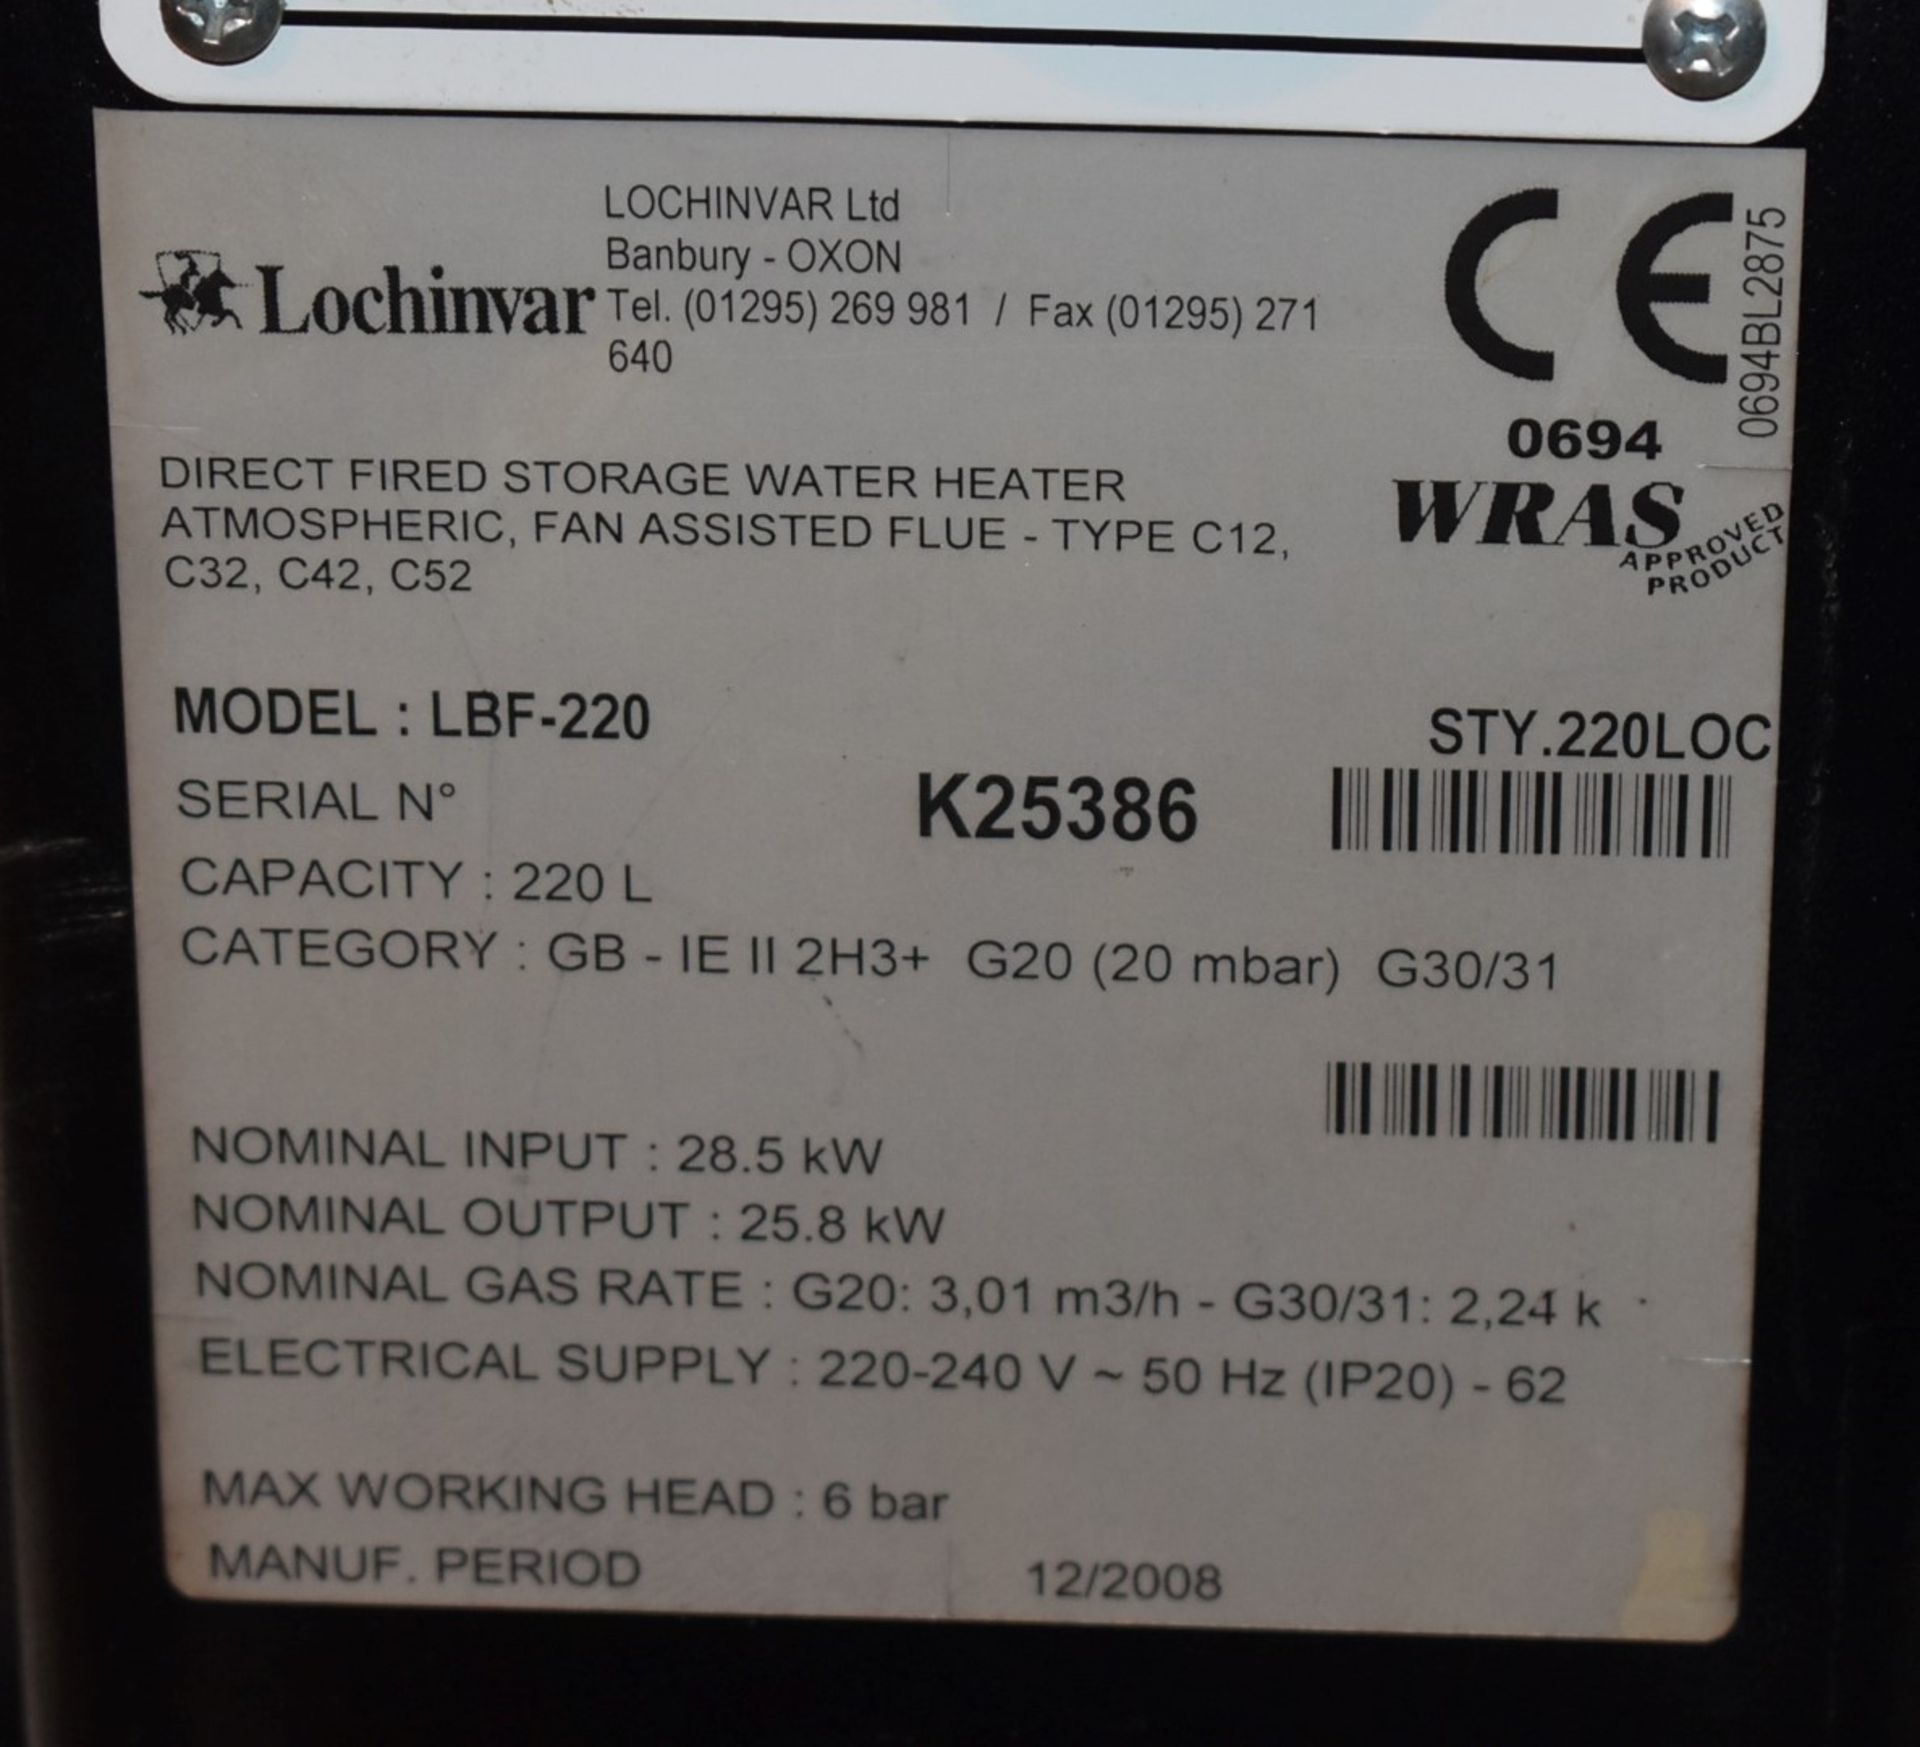 1 x Lochinvar High Efficiency Gas Fired 220L Storage Water Heater - Model LBF-220 - Ref: WH2-145 H5D - Image 12 of 14